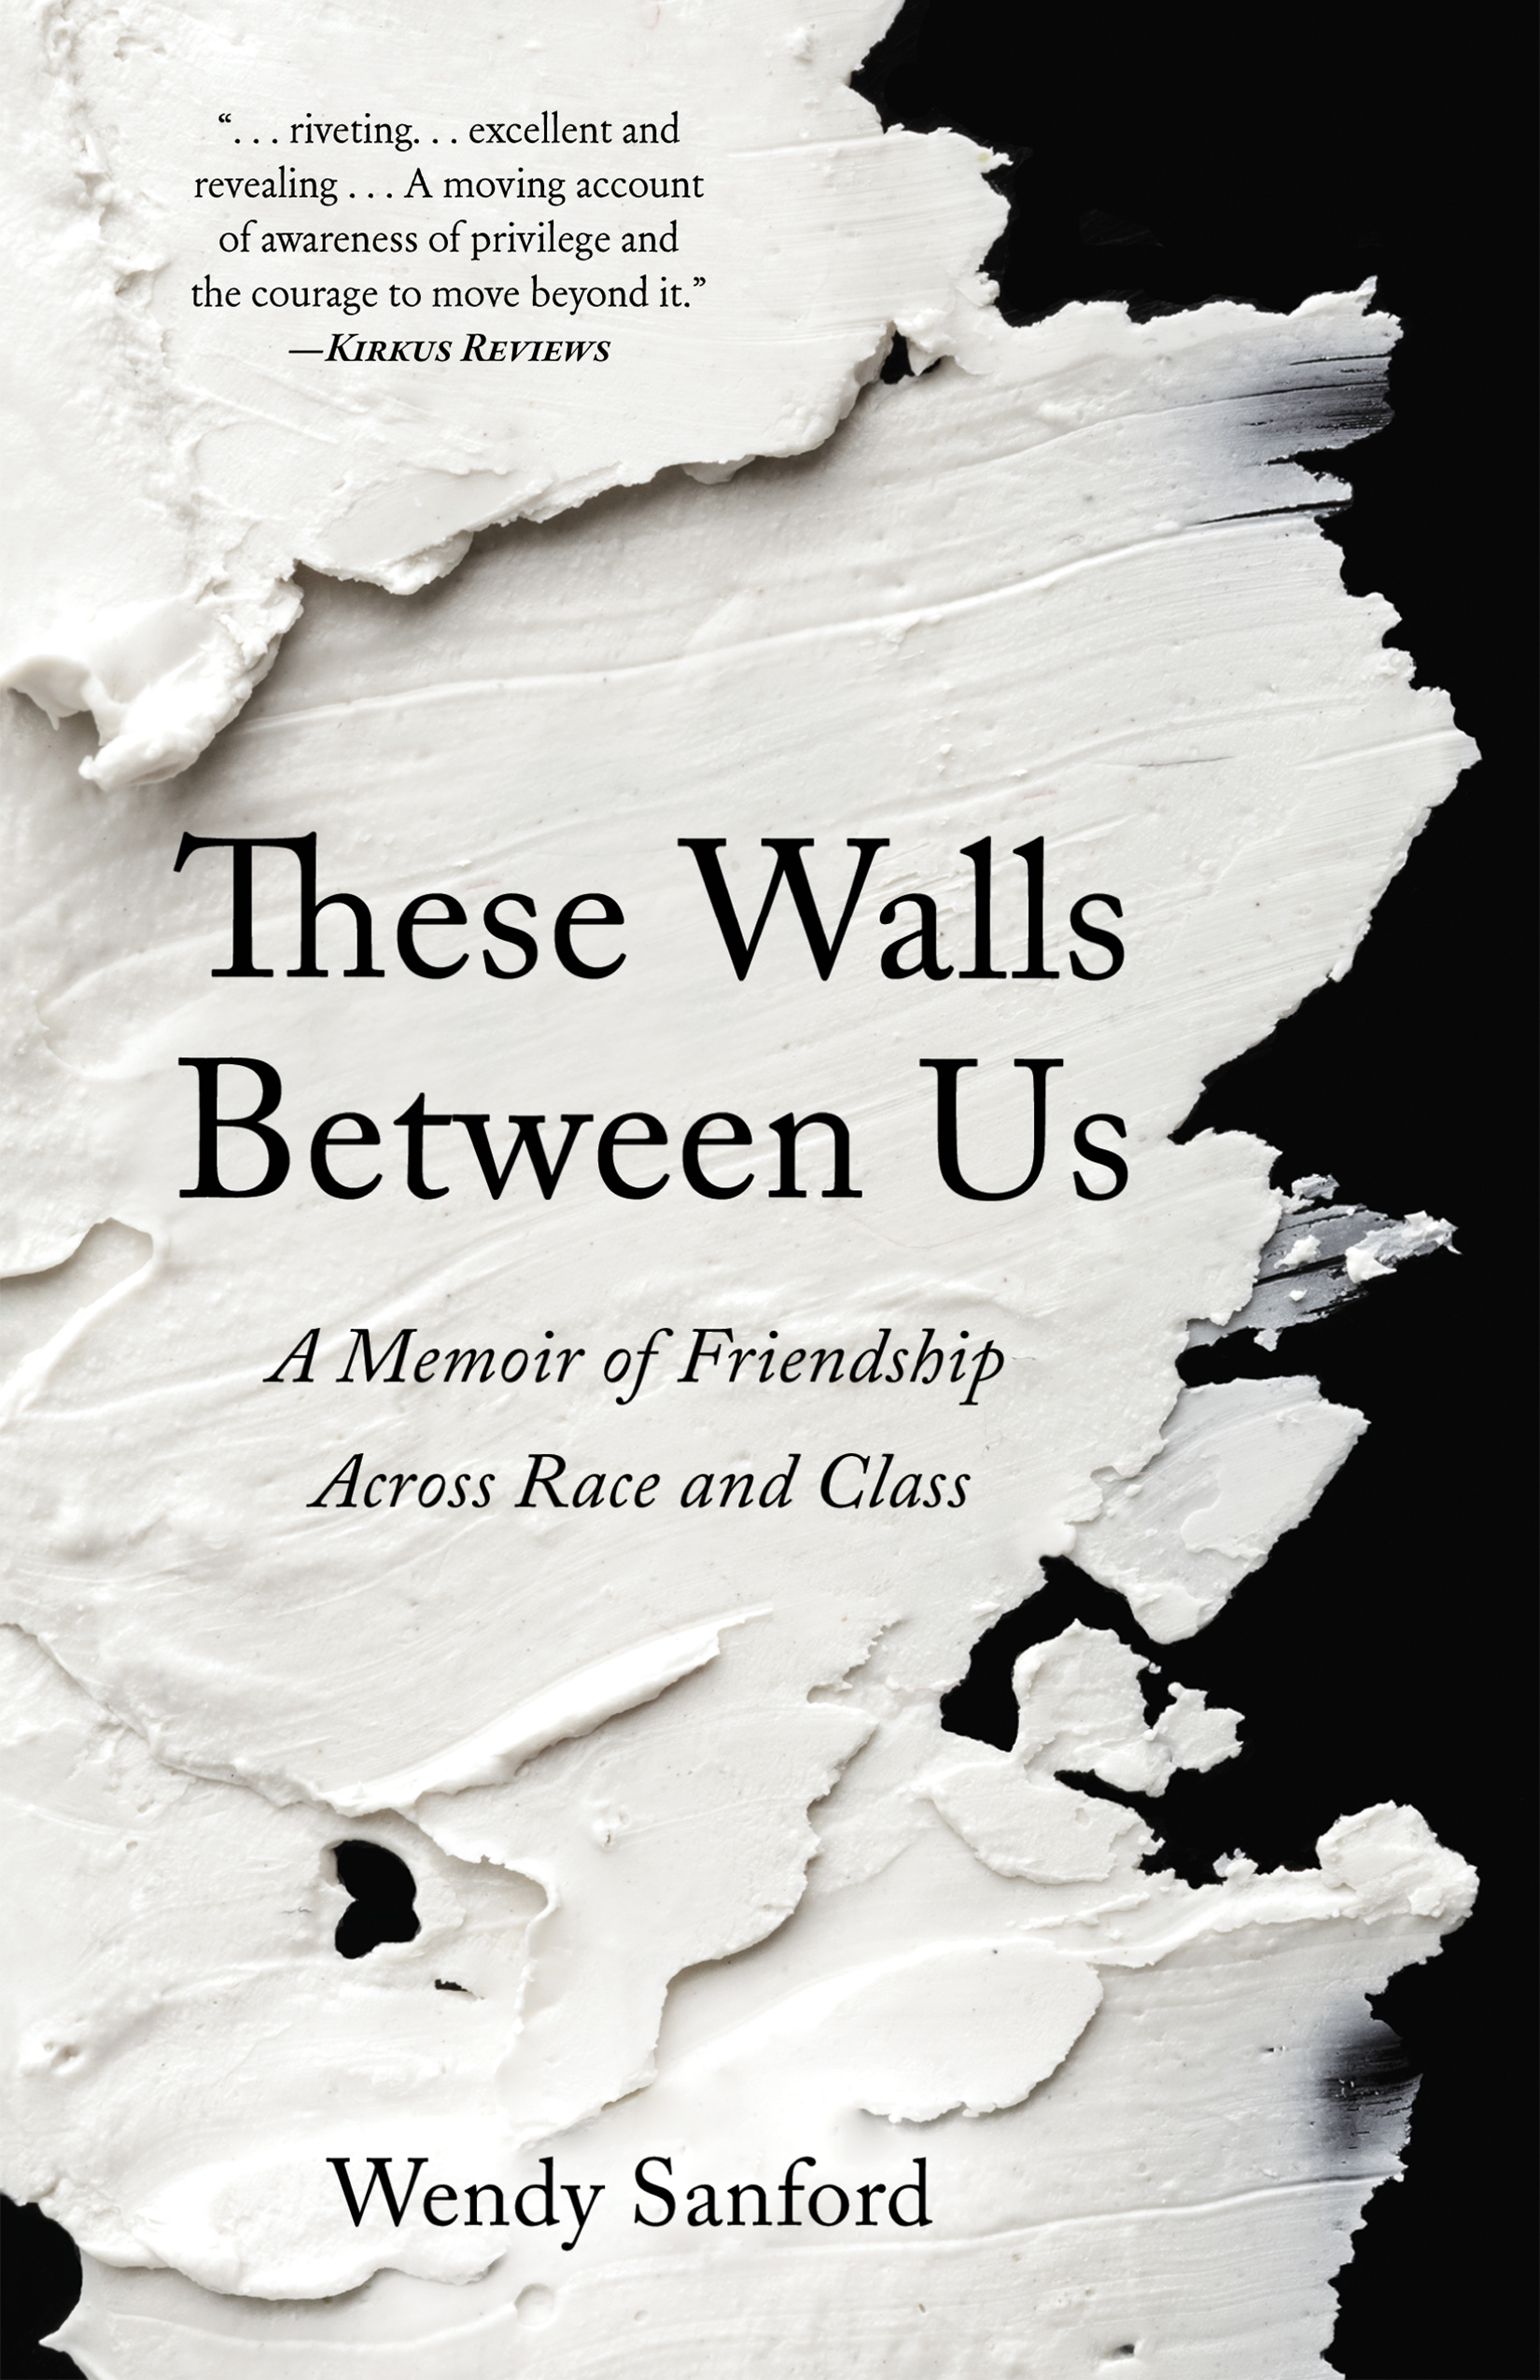 The cover for These Walls Between Us: Smears of white plaster on a black background, evoking the creation of walls.